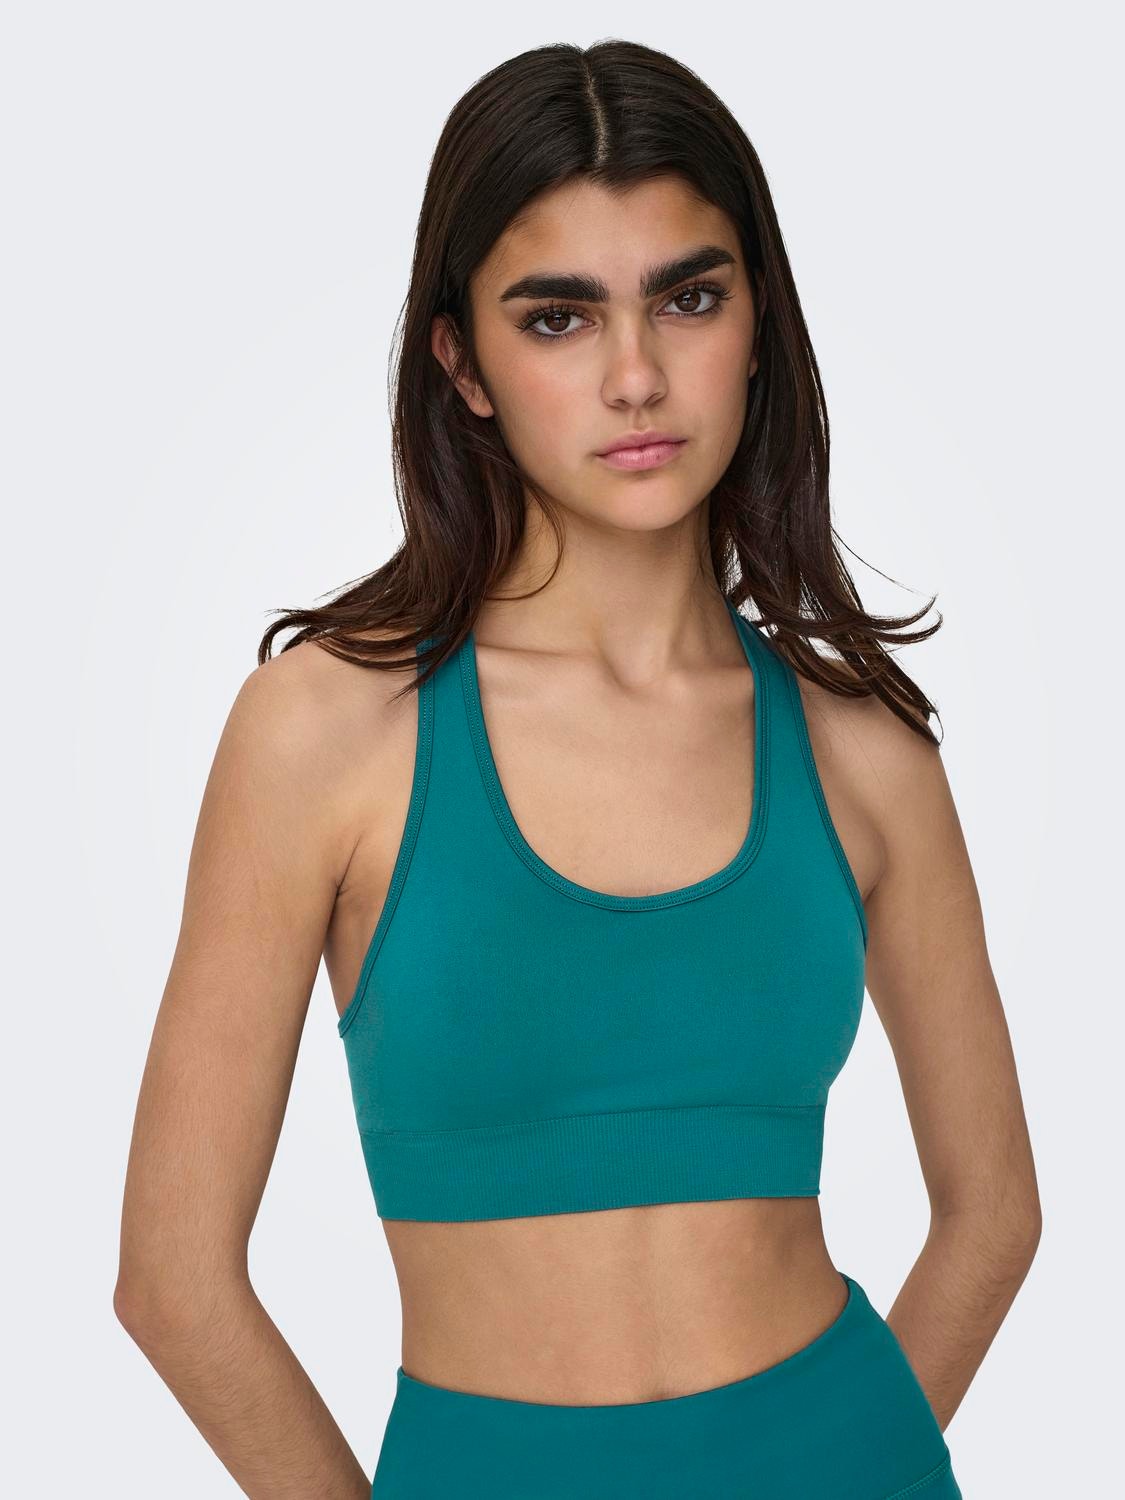 Teal/Turquoise Racerback Sports Bra with Adjustable Straps - Small